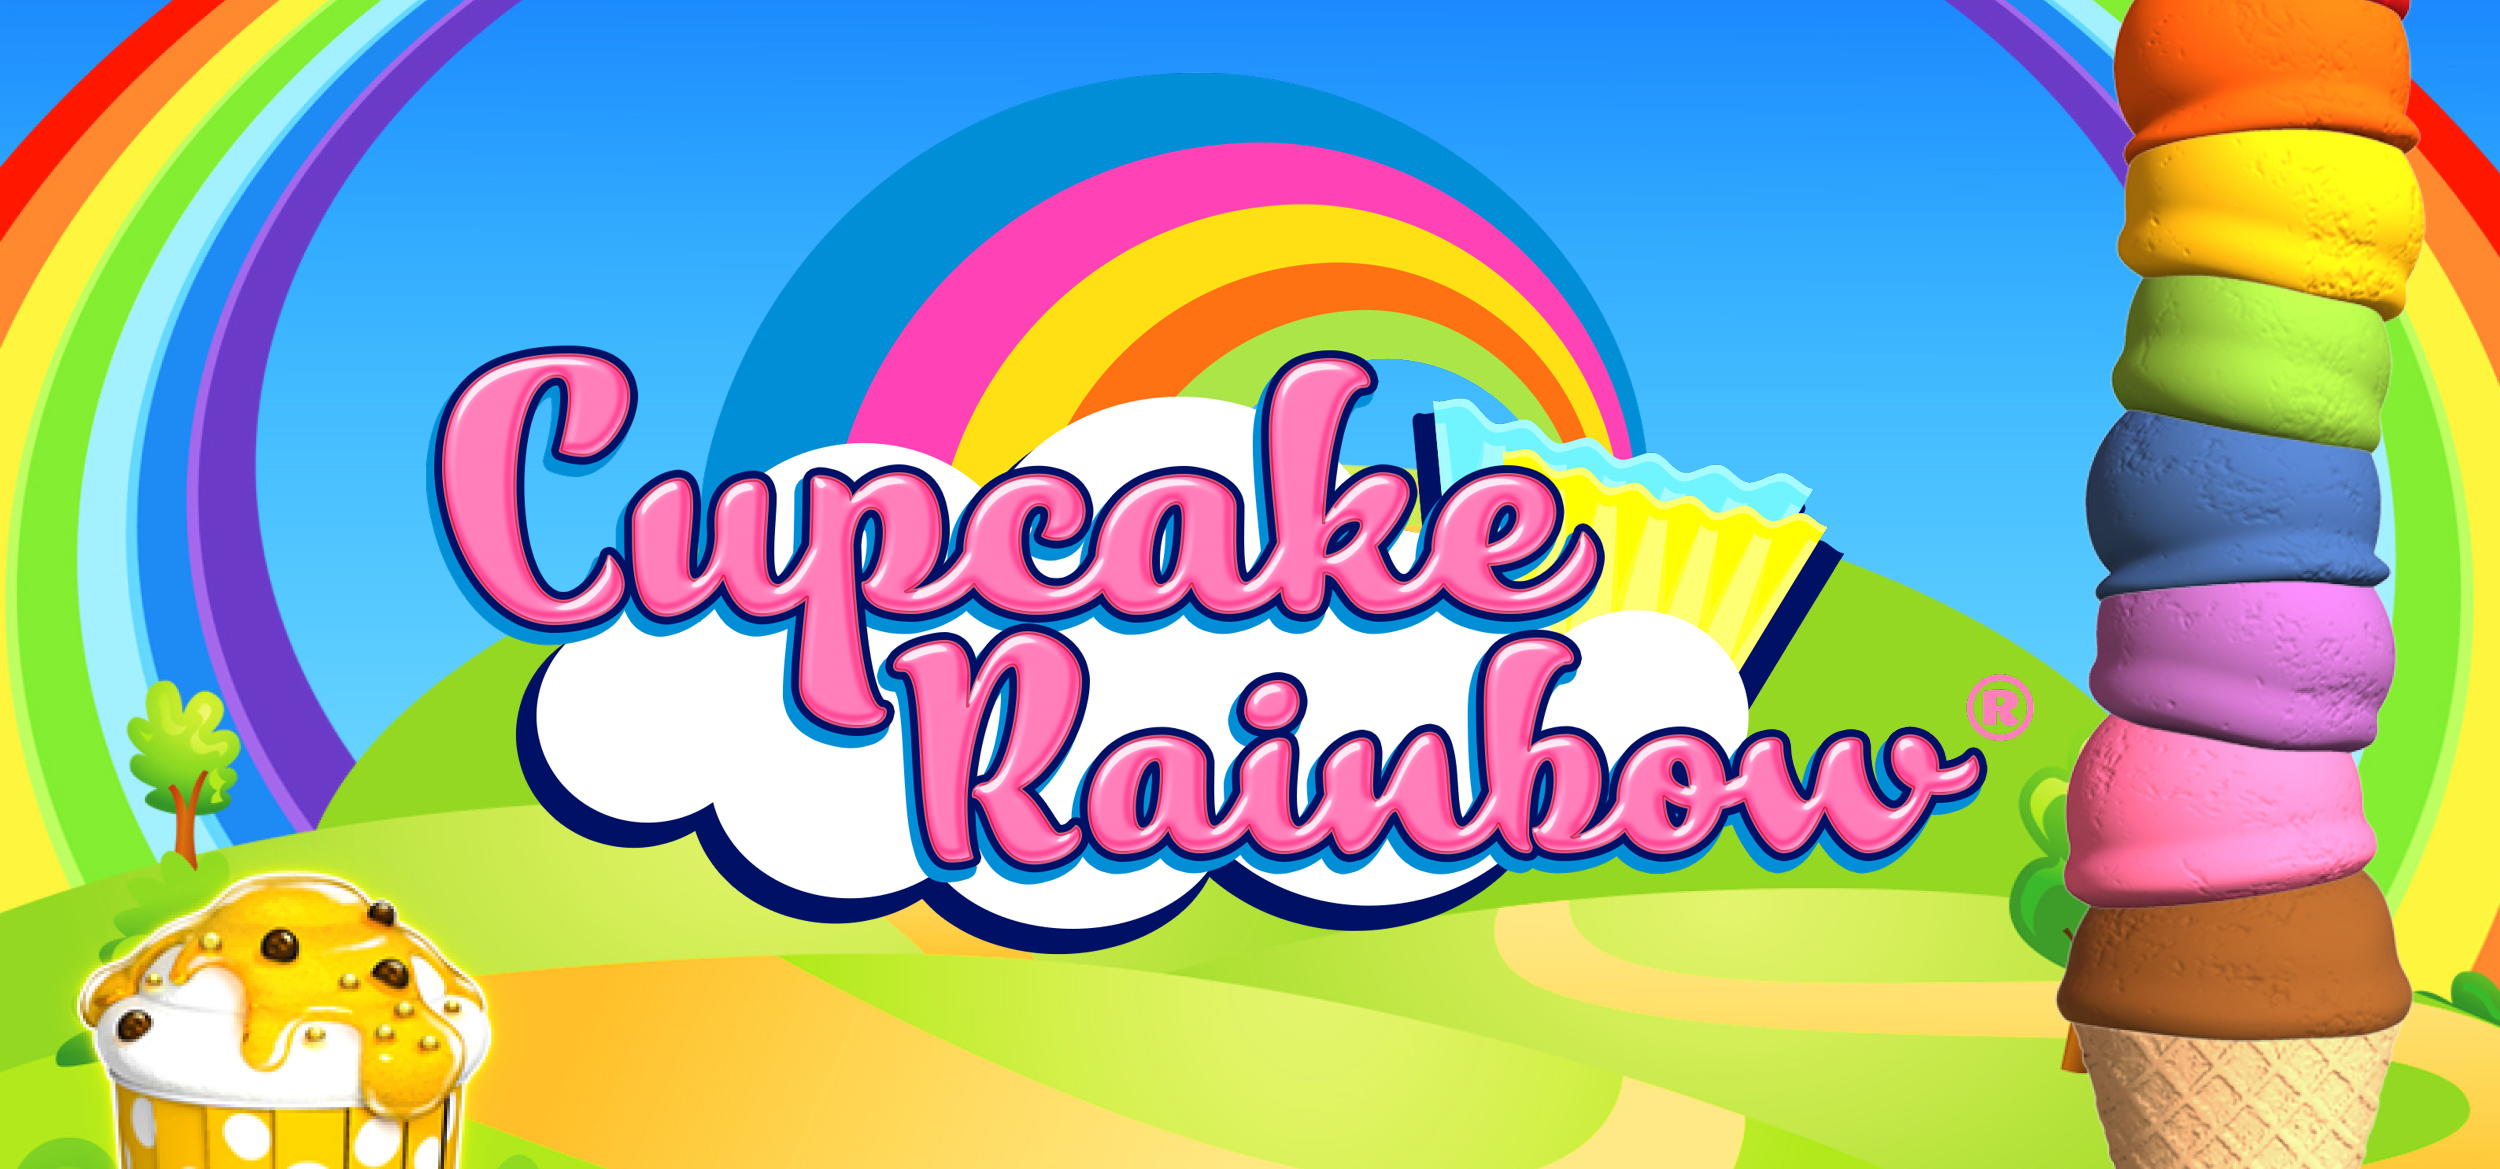 Get a real sugar rush by playing Cupcake Rainbow by Gaming1 on betFIRST Casino